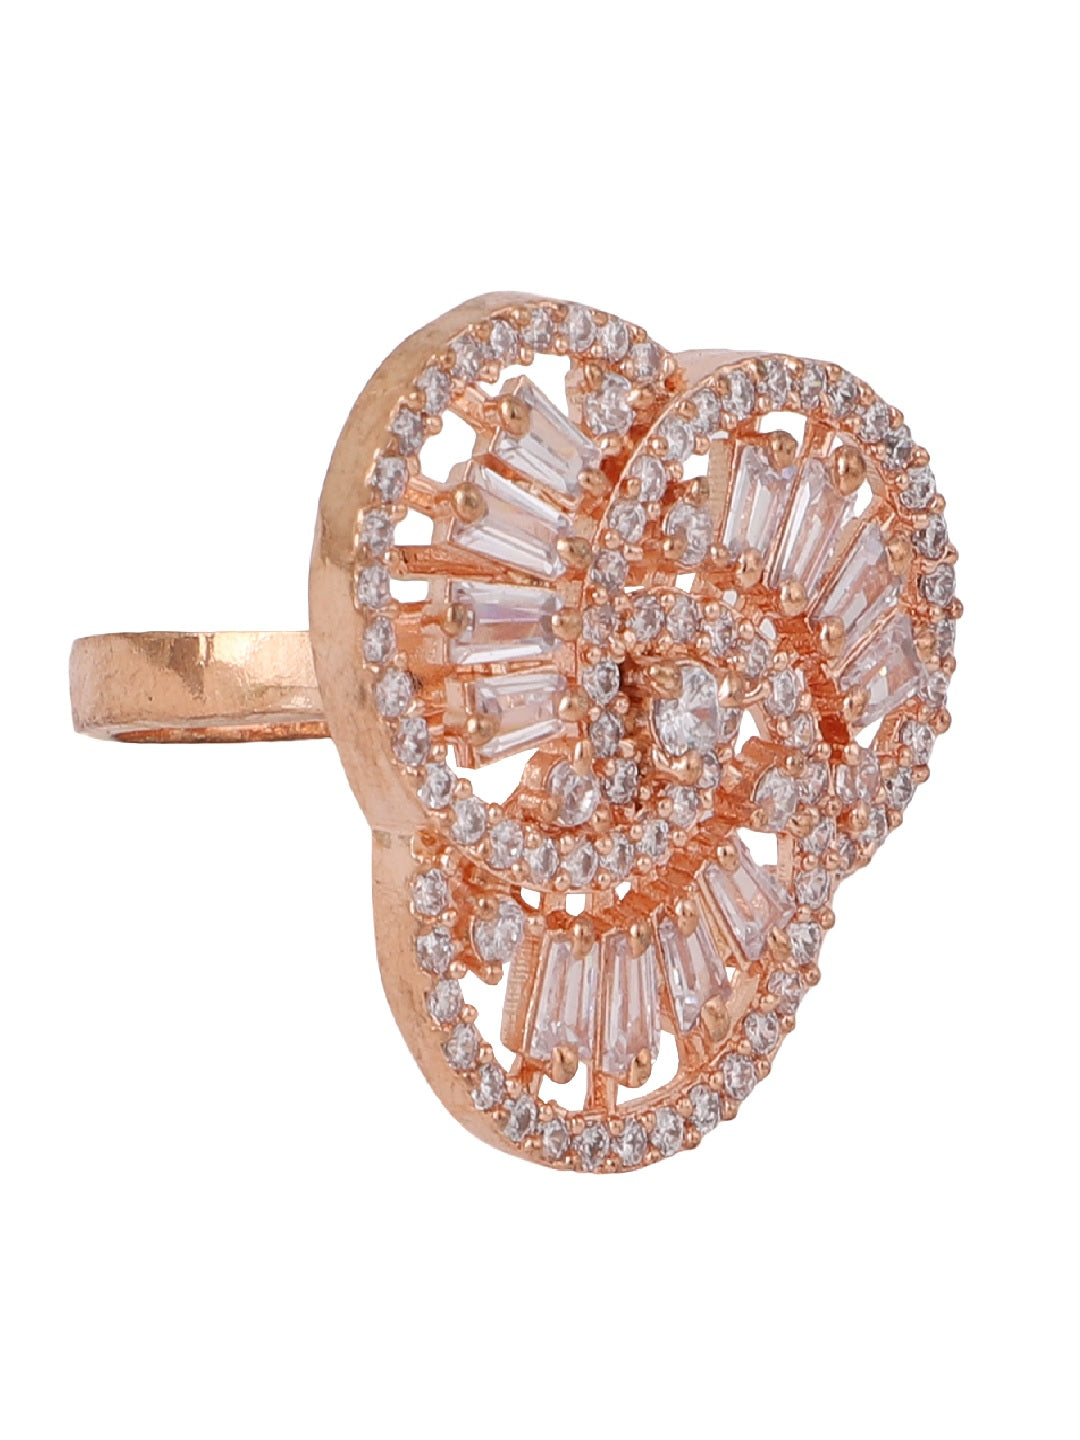 Women's Rose Gold-Plated Ad Studded Circular Hand Crafted Adjustable Finger Ring - Anikas Creation